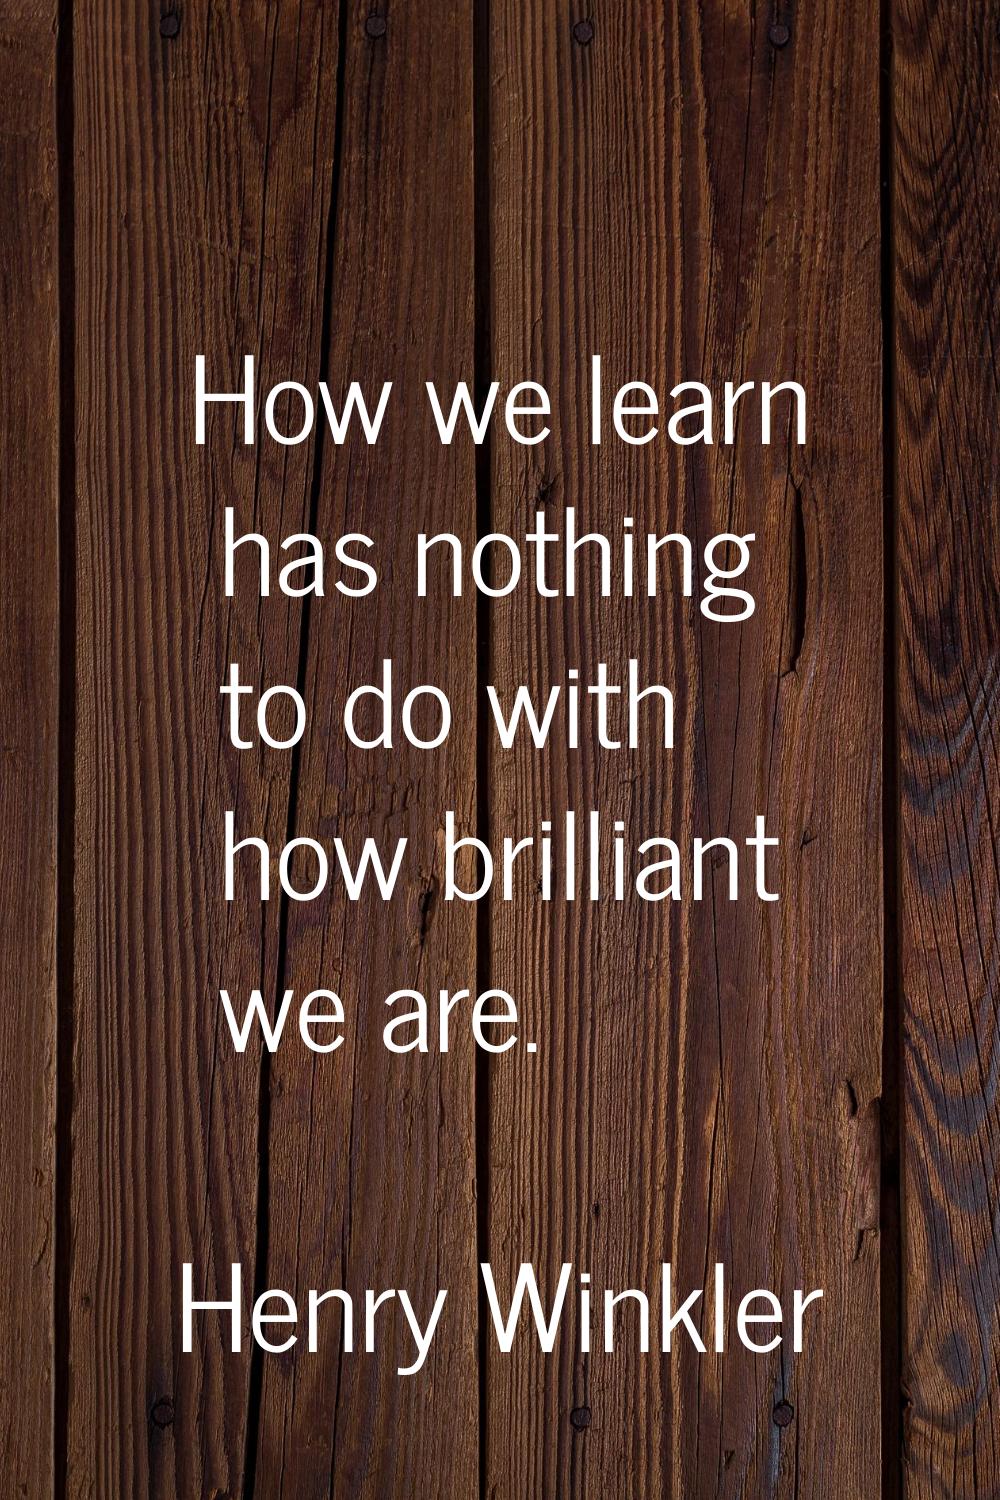 How we learn has nothing to do with how brilliant we are.